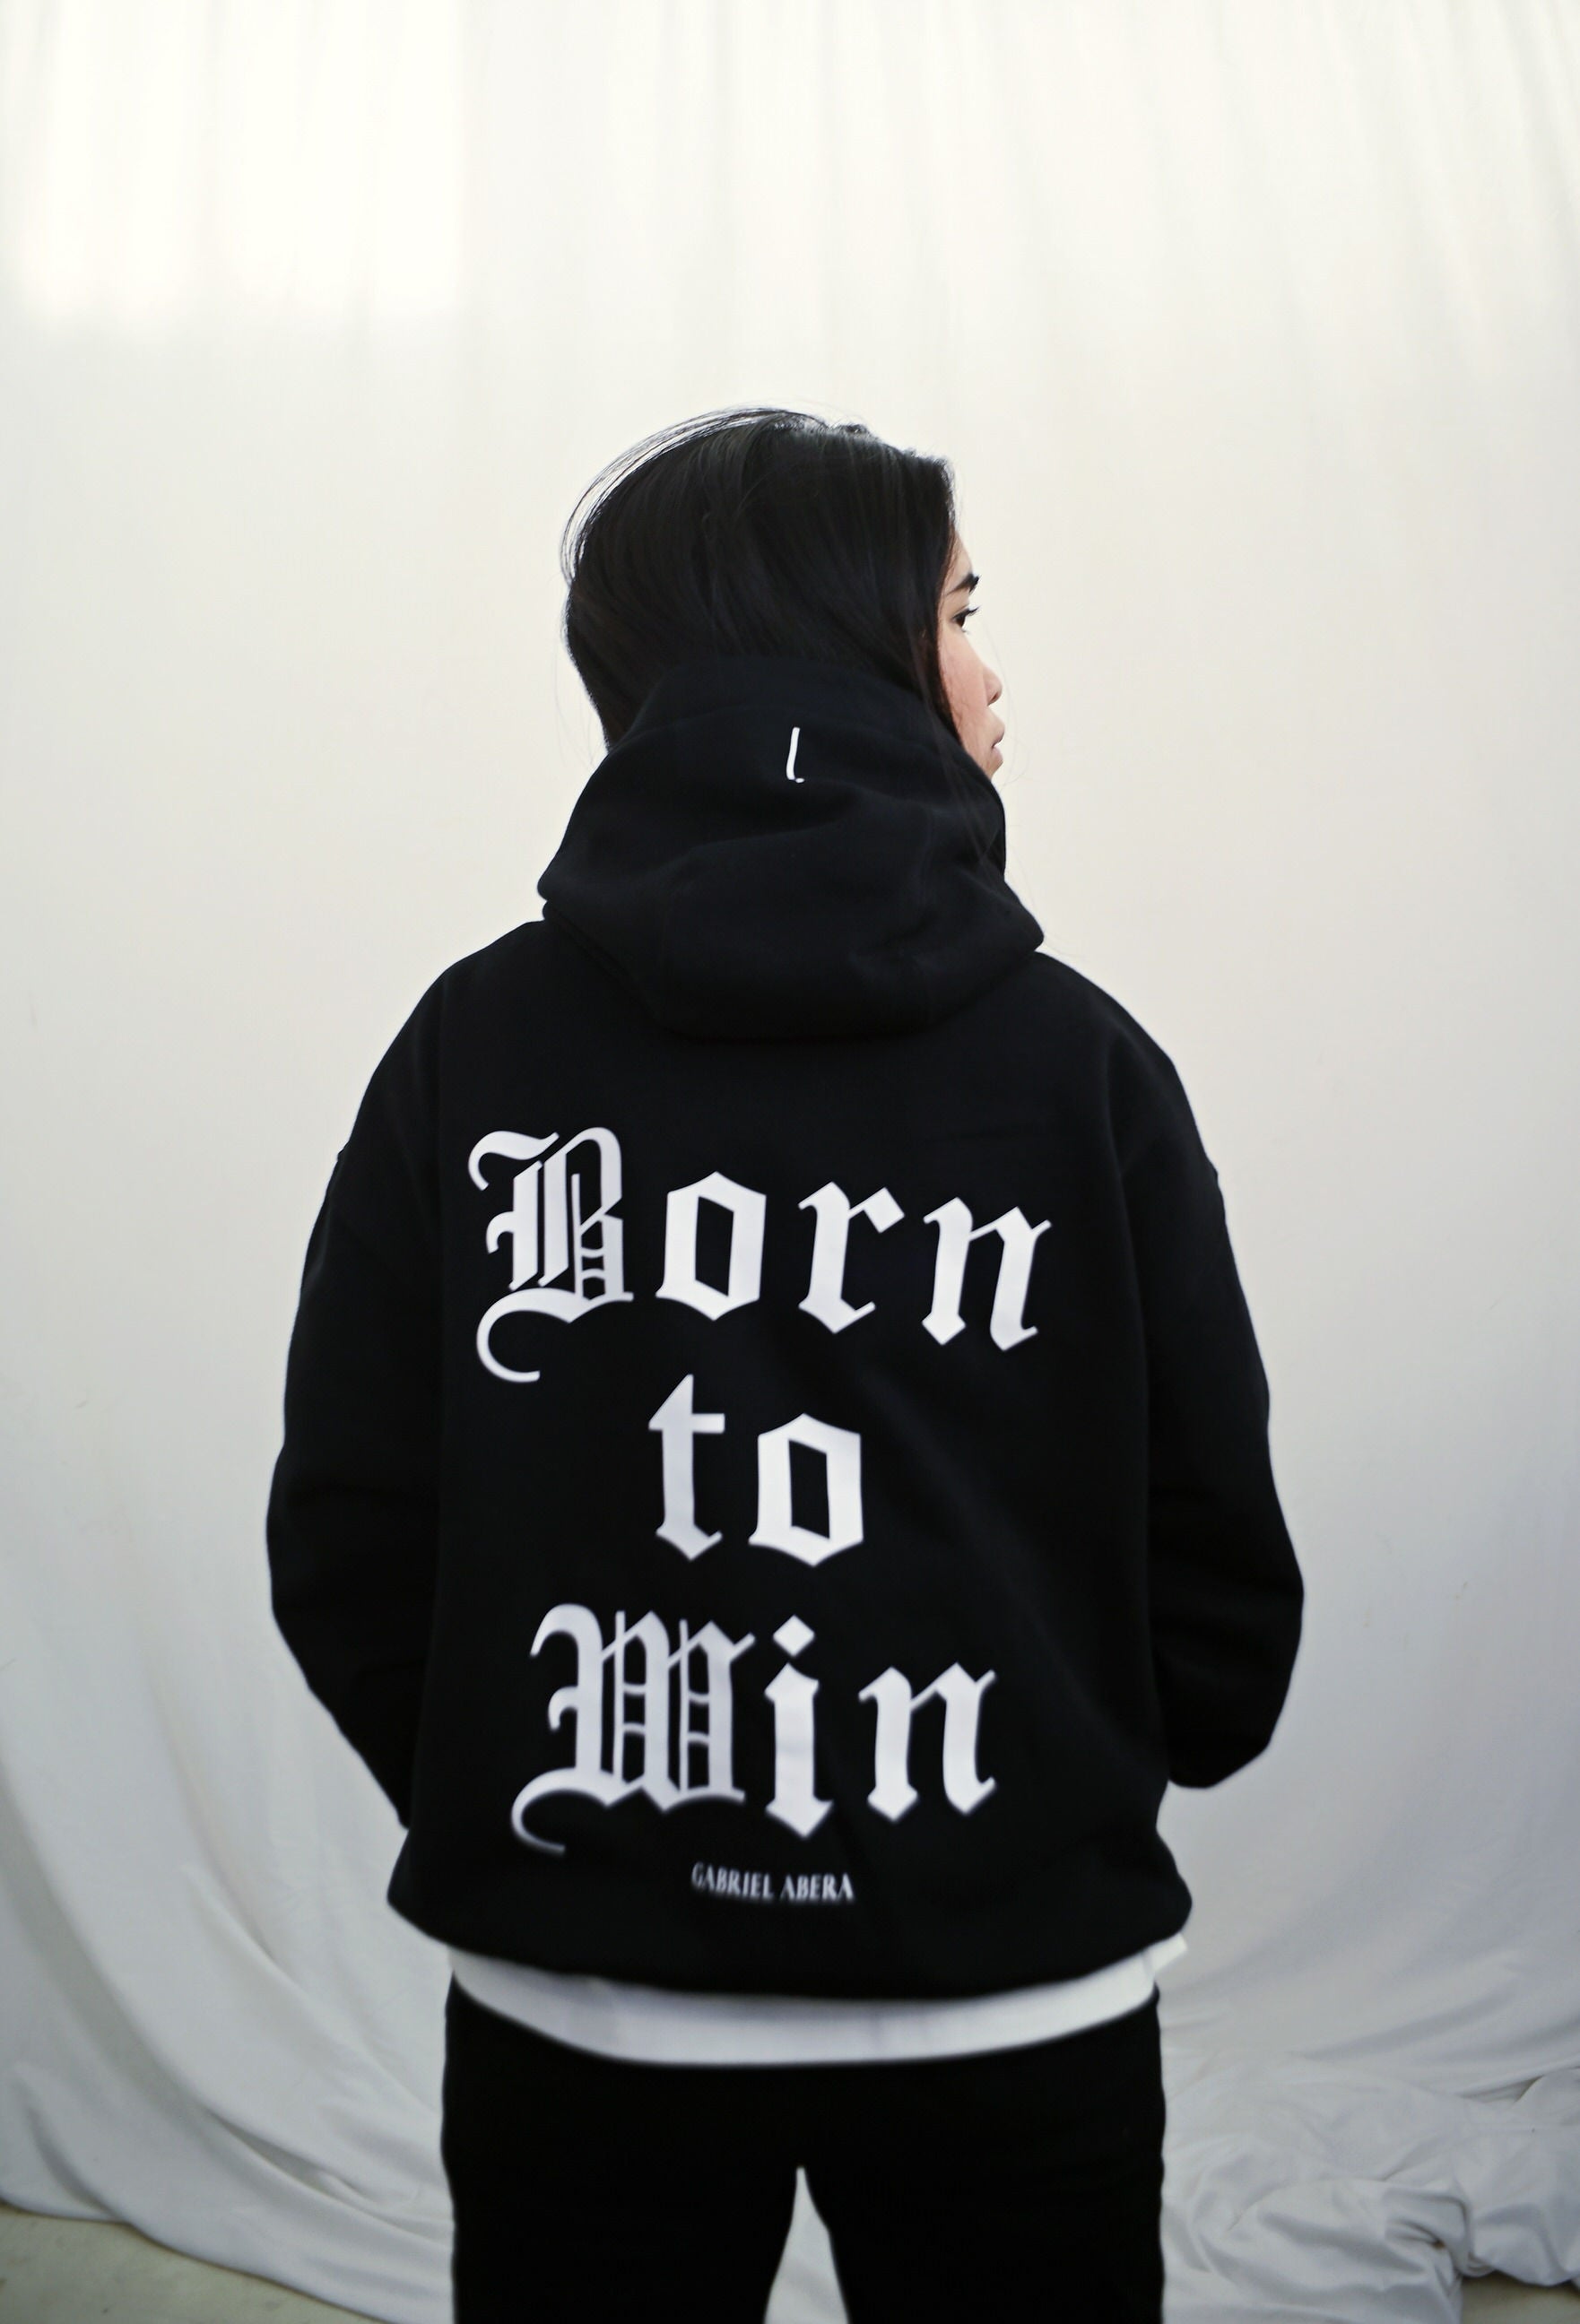 Female model wearing a Black oversize hoodie with white born to win design on the back